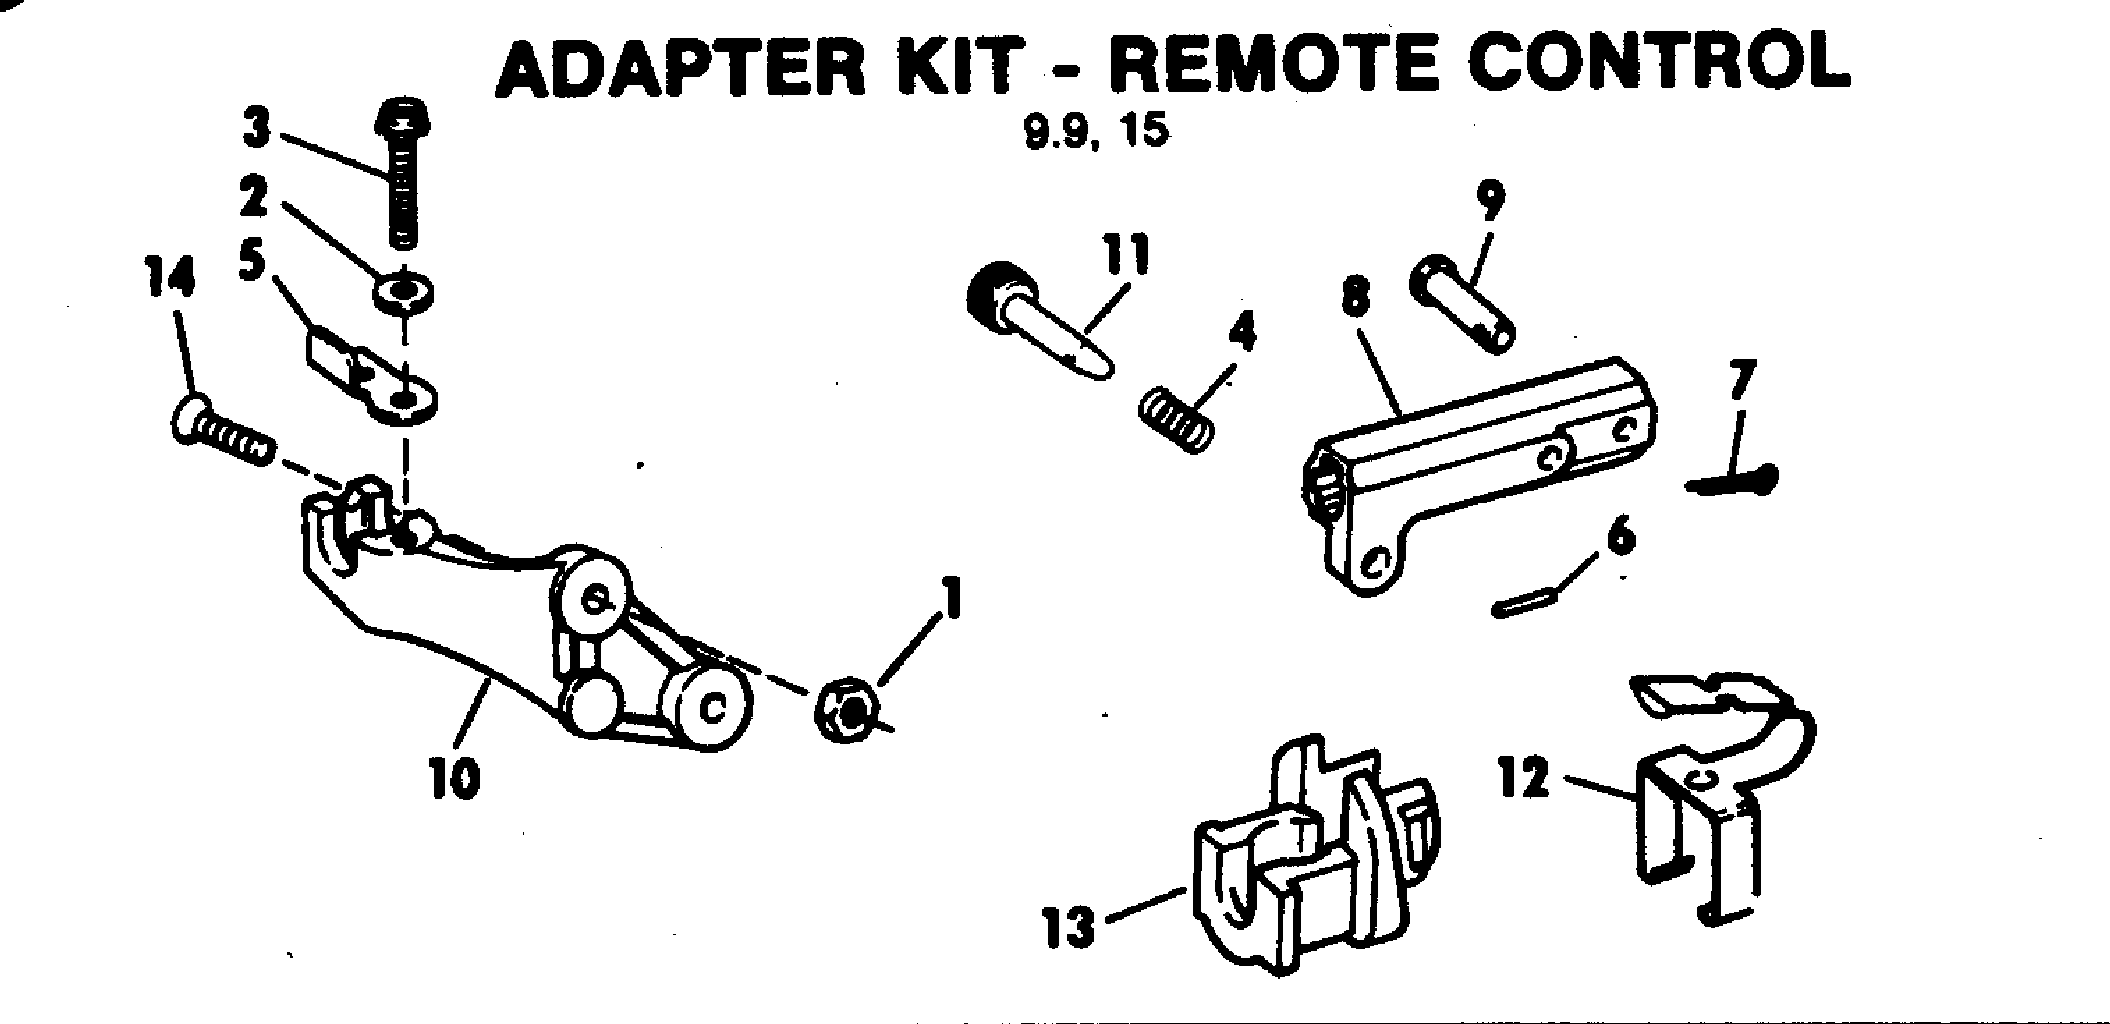 Nissan outboard remote kit #8